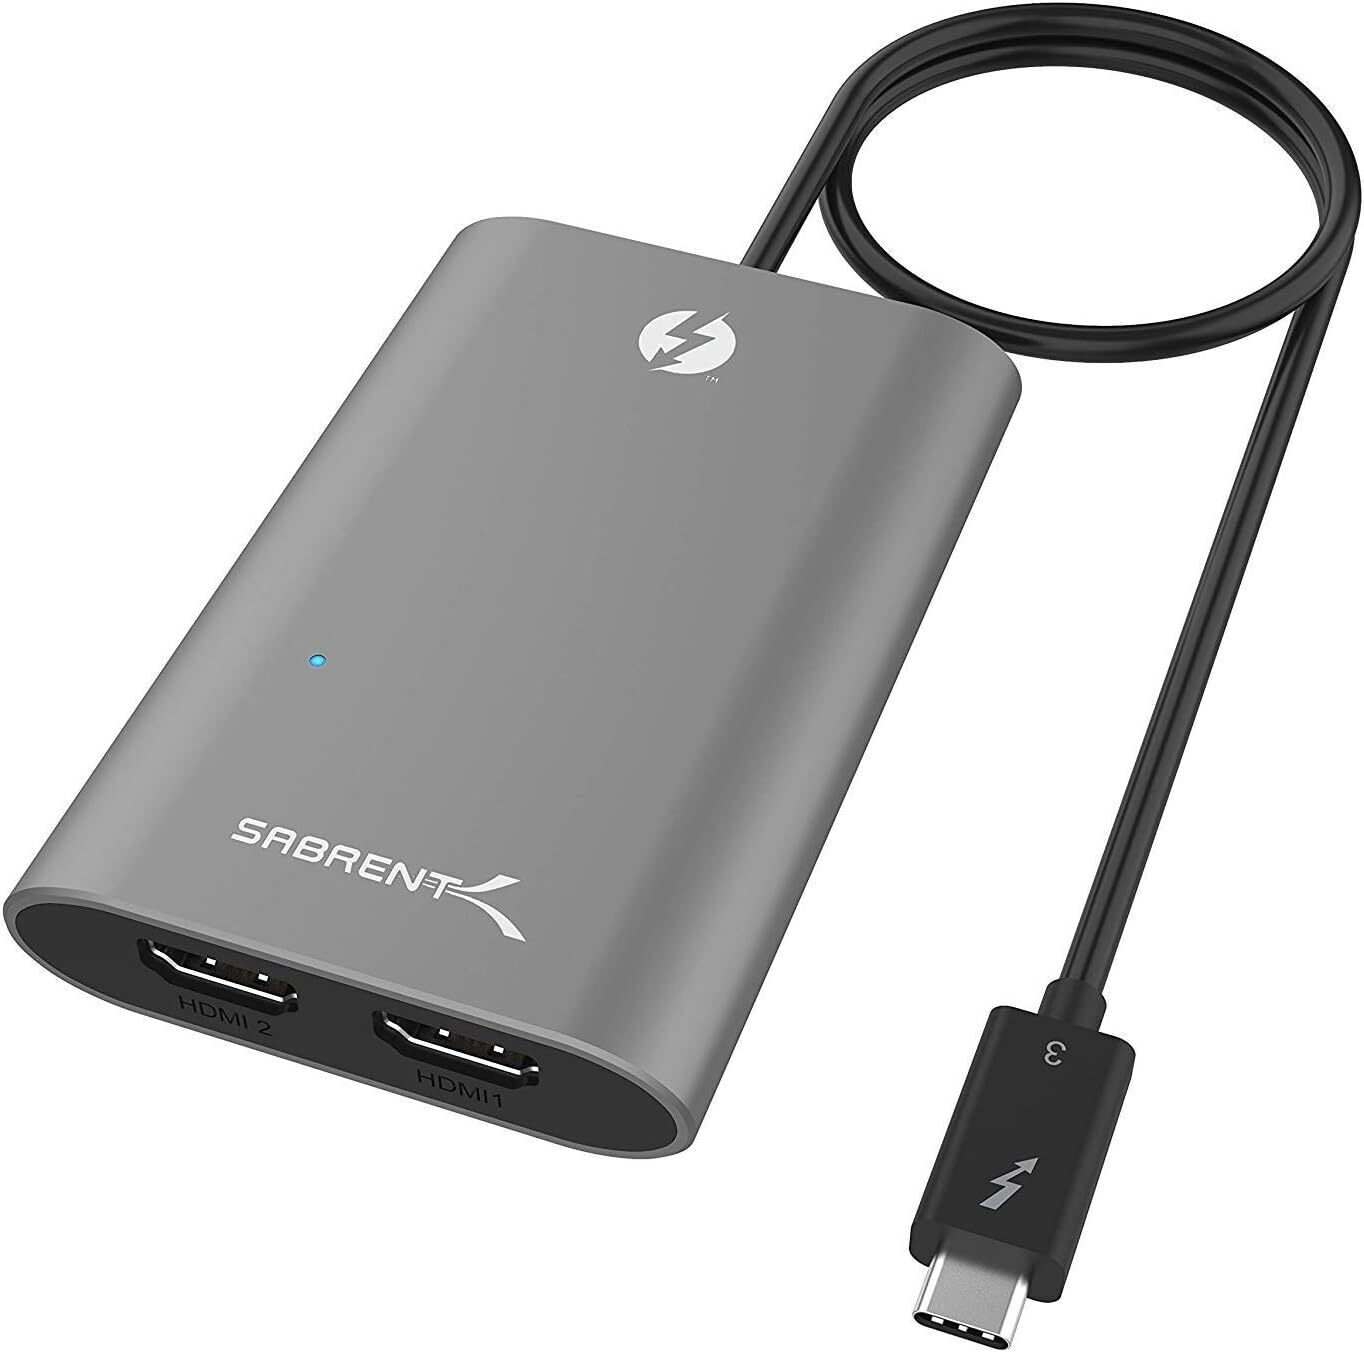 Sabrent Thunderbolt 3 to Dual HDMI 2.0 Adapter Supports Two 4K 60Hz Monitors